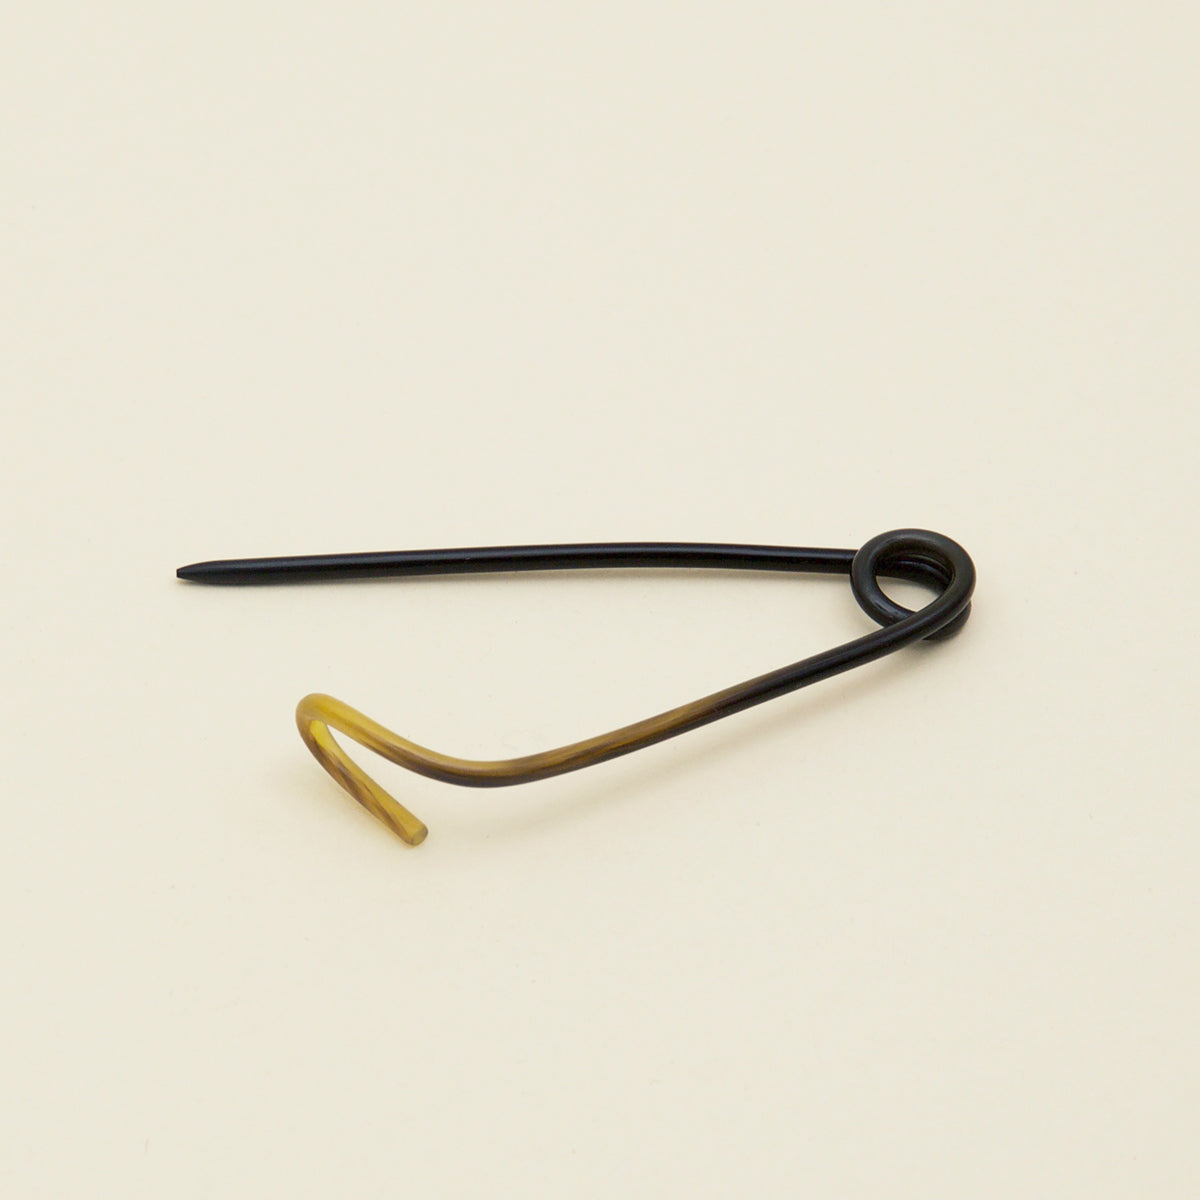 Horn Safety Pin – The Good Liver